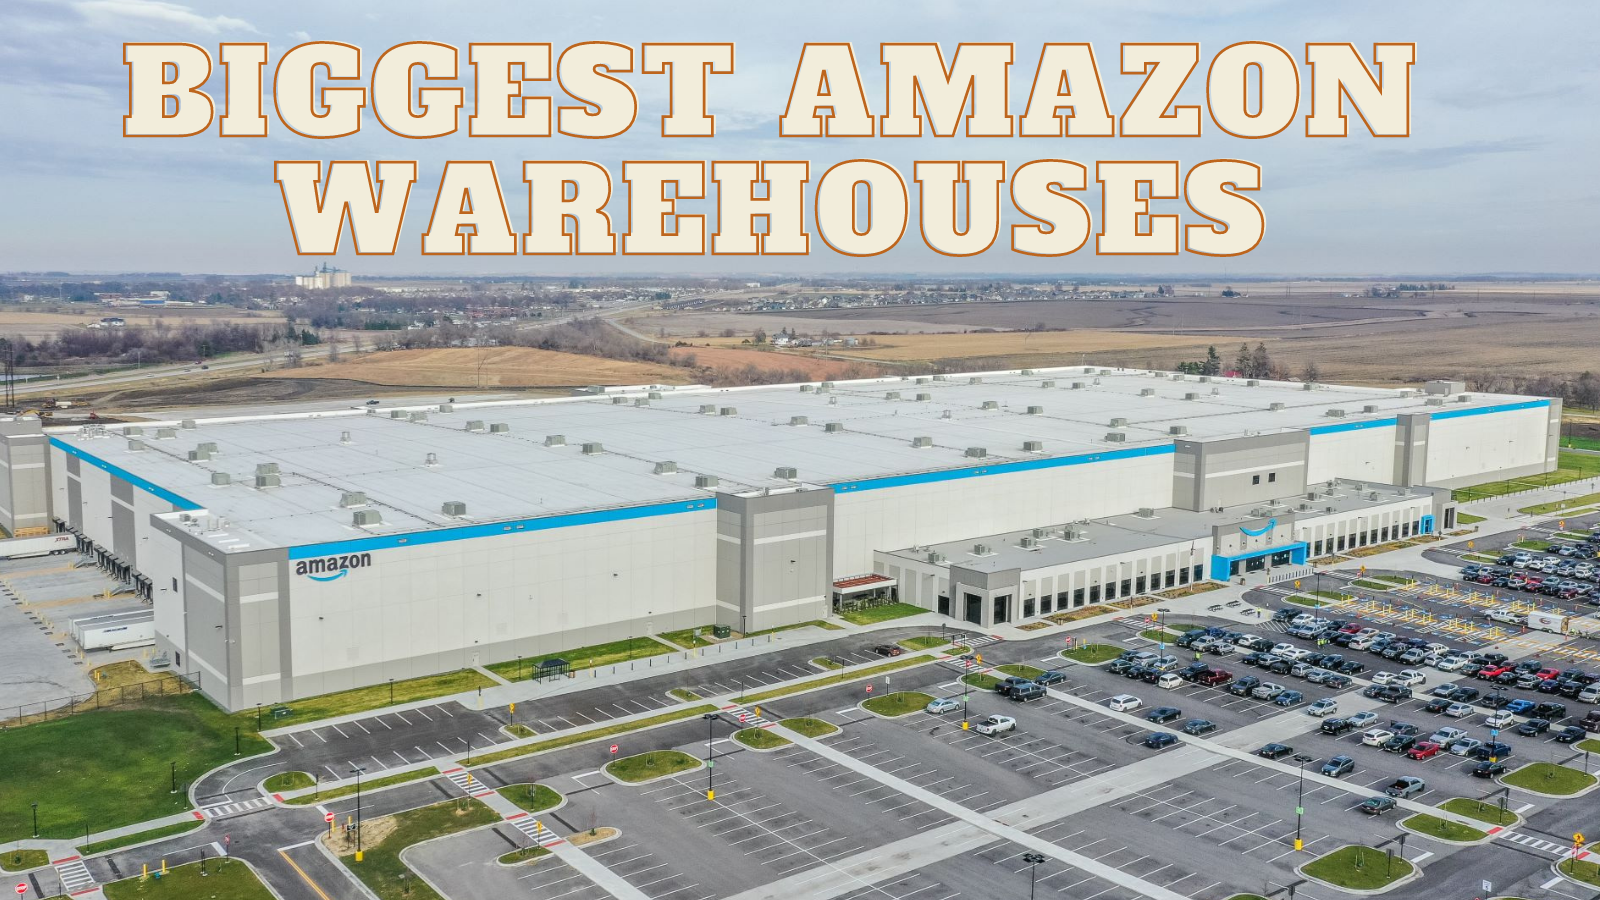 A Complete Guide about Biggest Amazon Warehouse in 2022